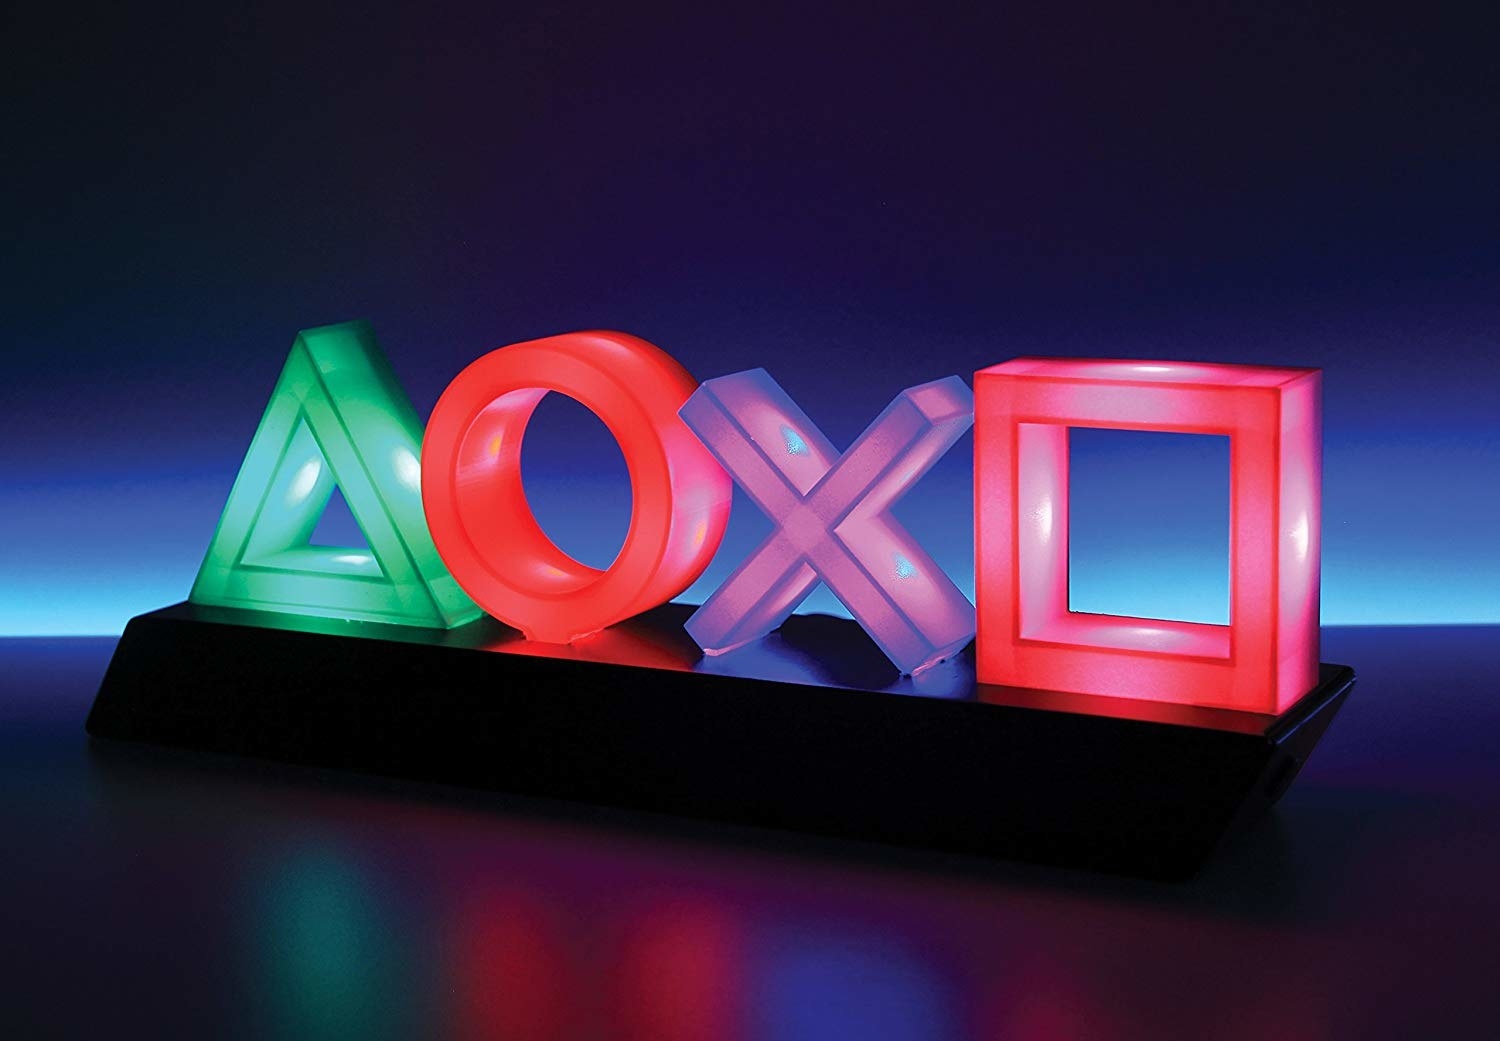 A neon light of the Playstation symbols arranged on a dark surface